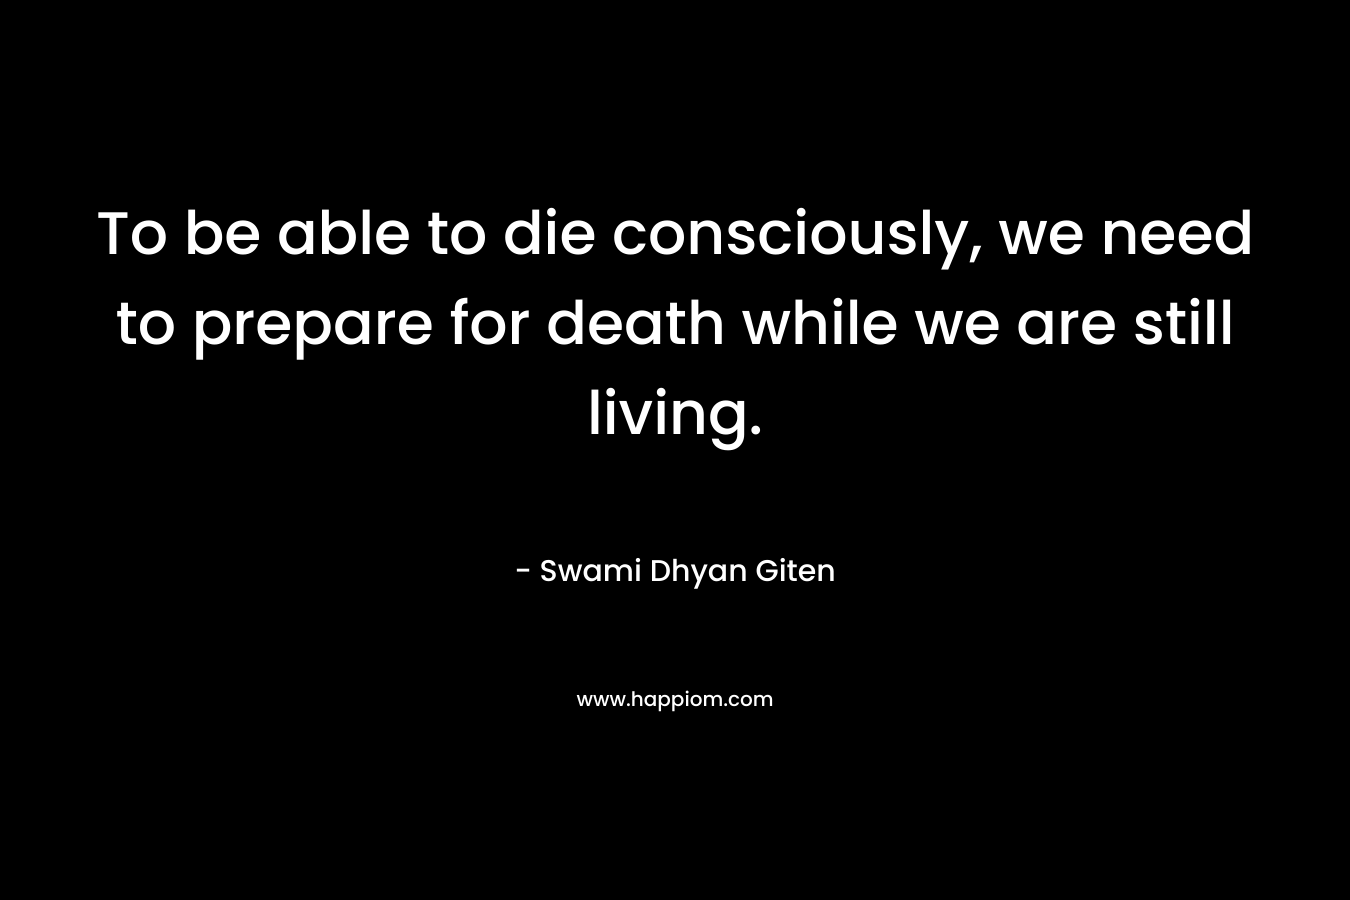 To be able to die consciously, we need to prepare for death while we are still living.